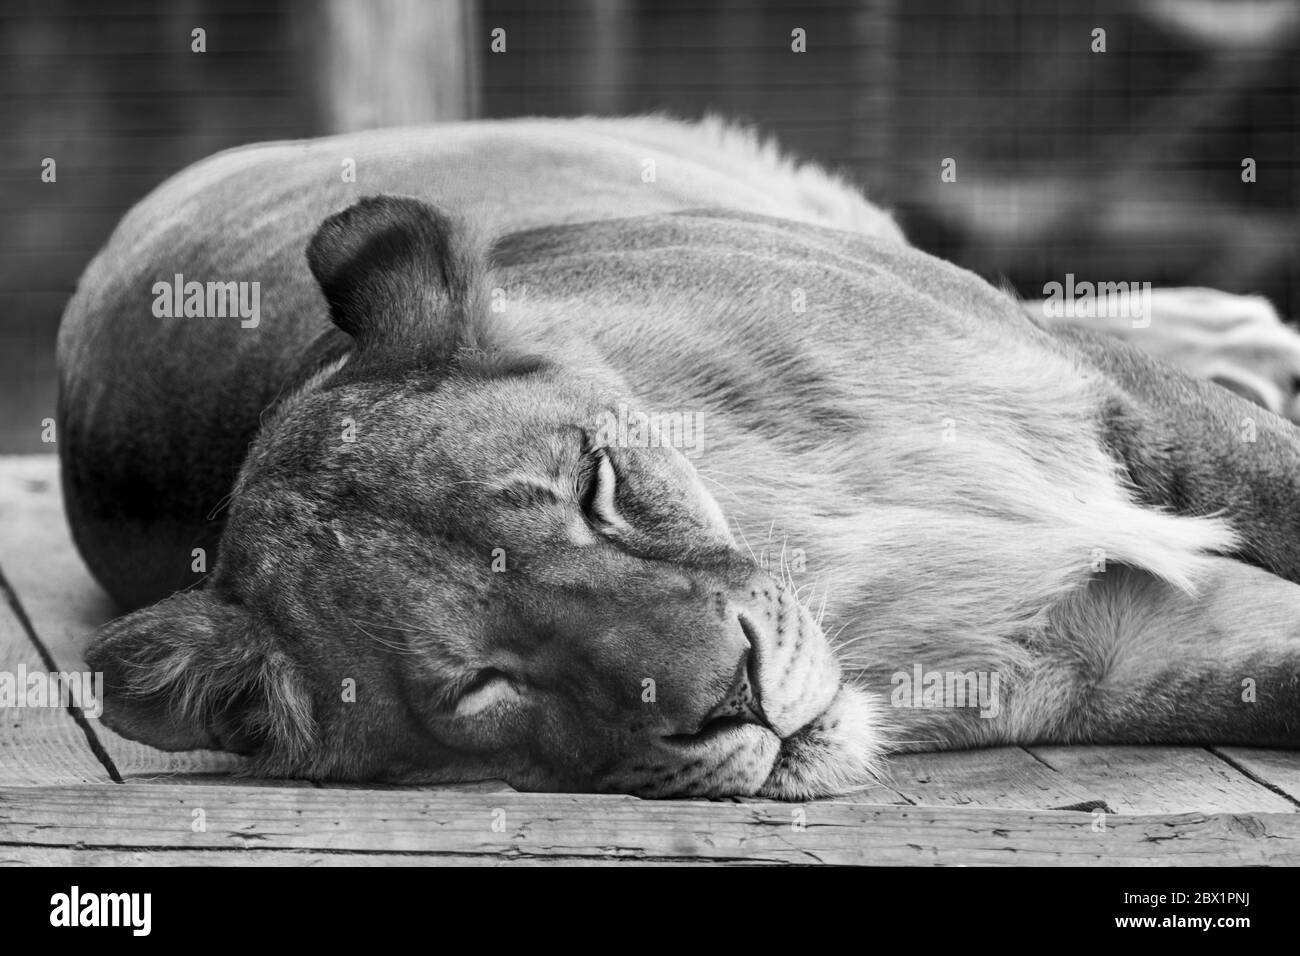 Lion female Lioness sleeping on wooden floor in zoo with blurred background. Greyscale Stock Photo